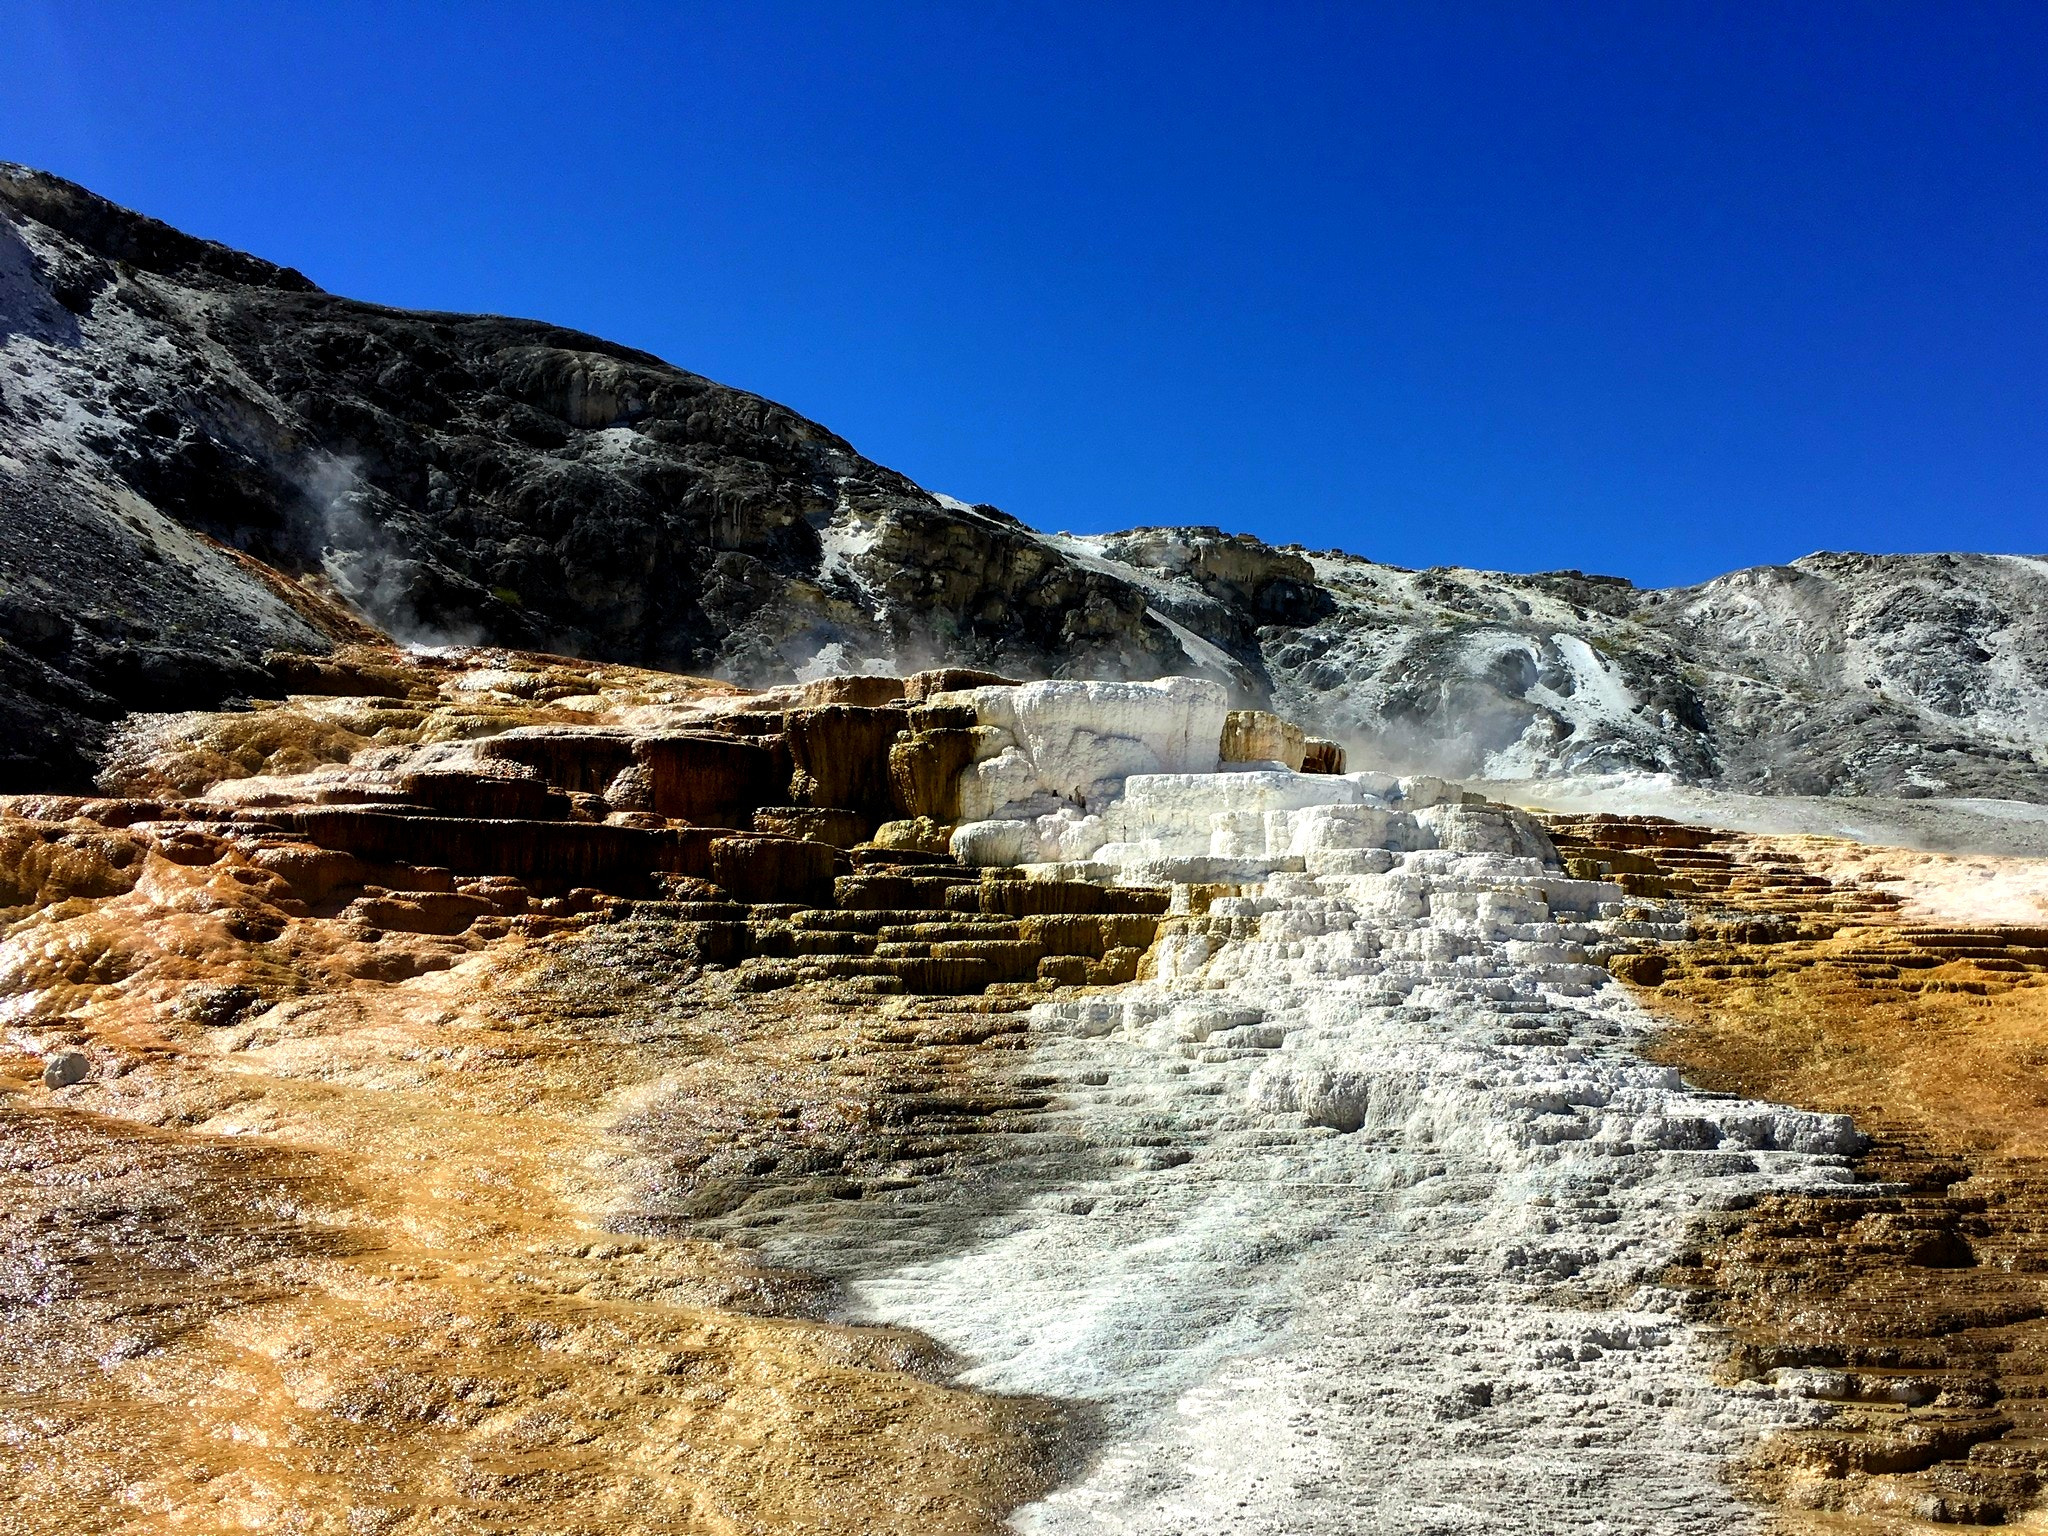 Jag.gr 645 PRO Mk III for Apple iPhone 6s sample photo. Mammoth hot spring photography